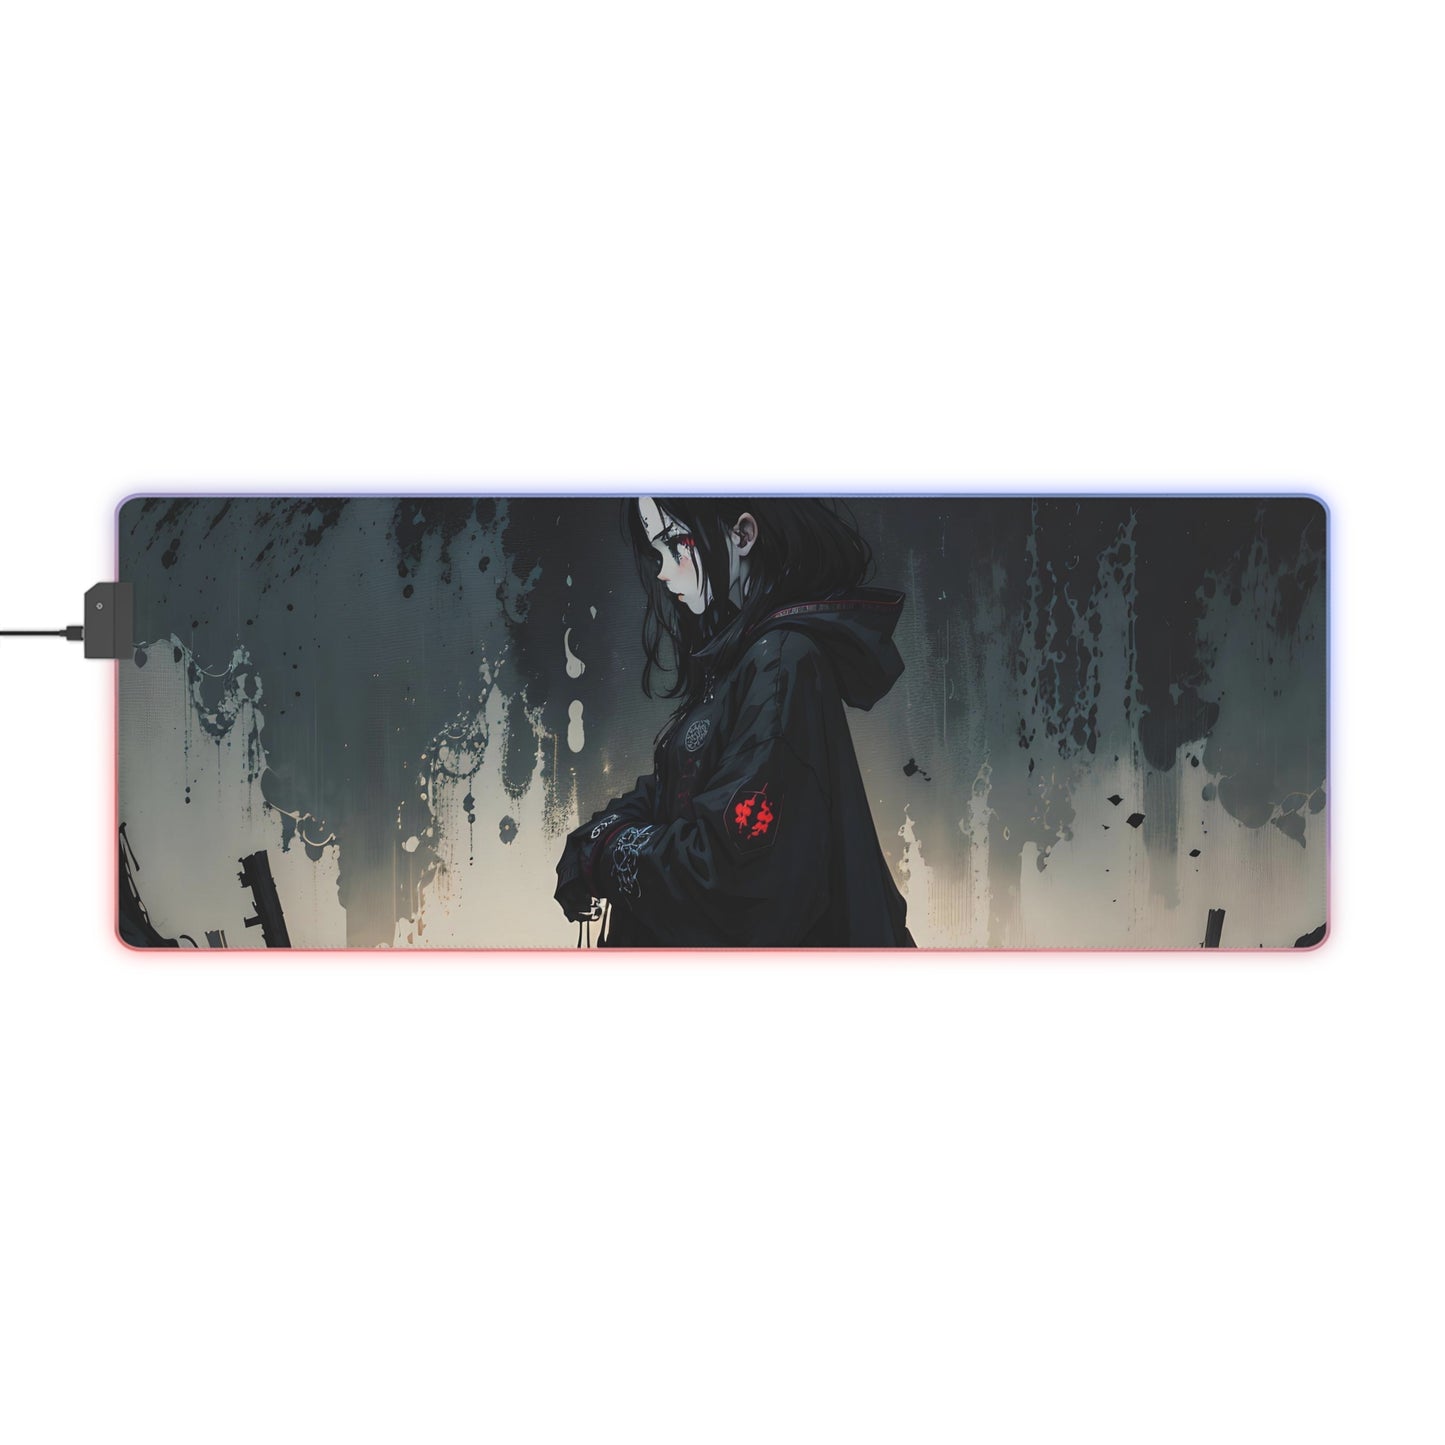 AG-14 LED Gaming Mouse Pad